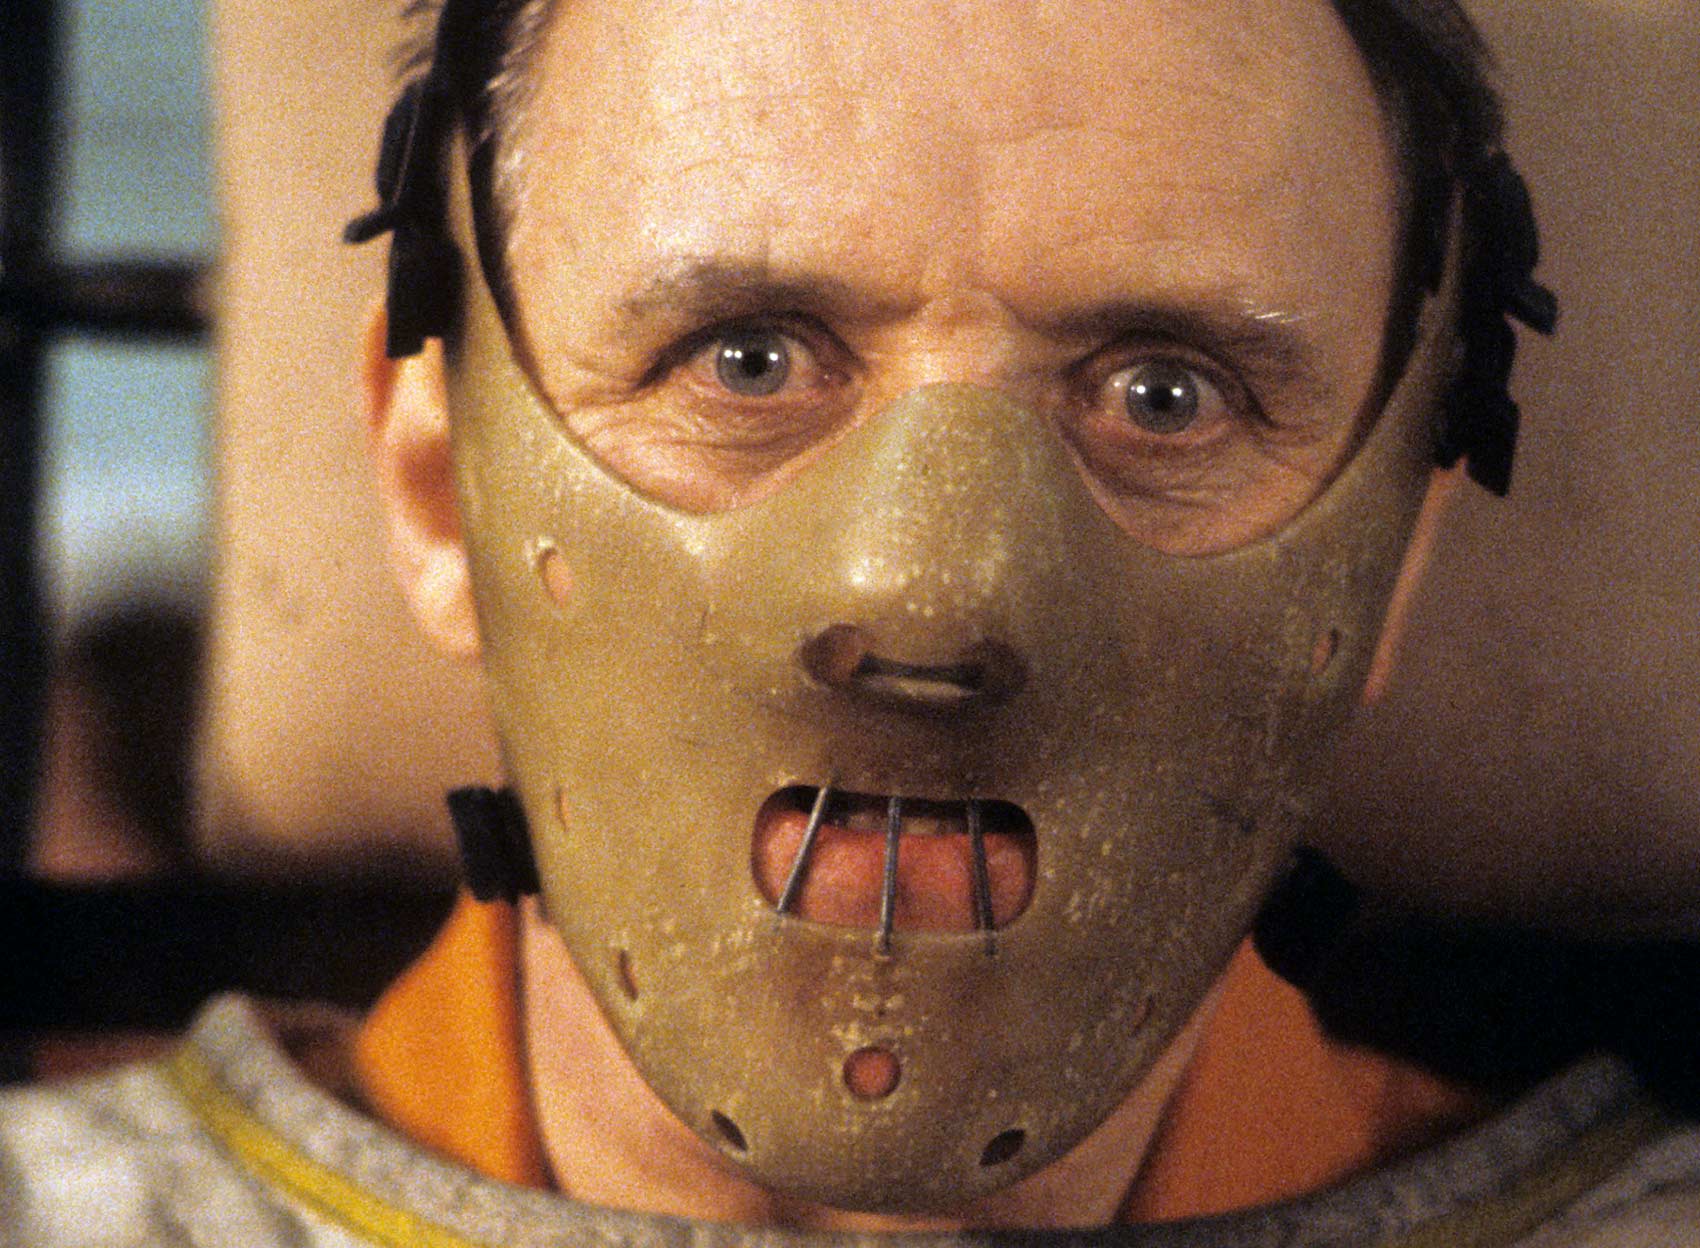 “I Couldn't Stop Thinking of Him as Hannibal Lecter”: The Role That Cost Anthony Hopkins a Relationship